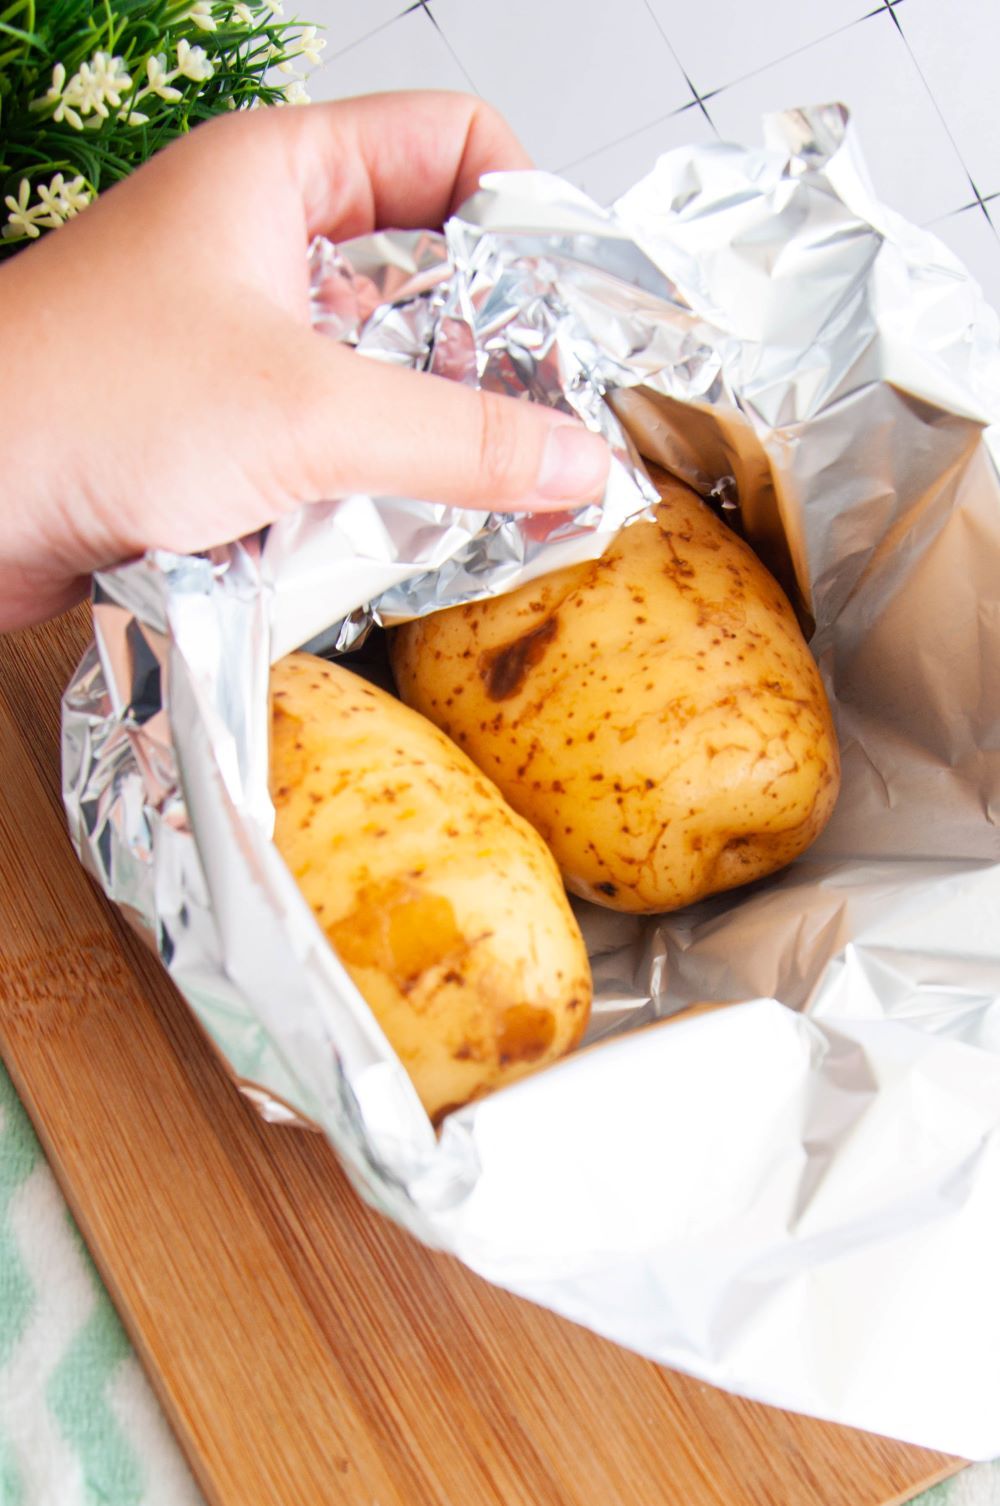 Removing the potatoes from the foil 